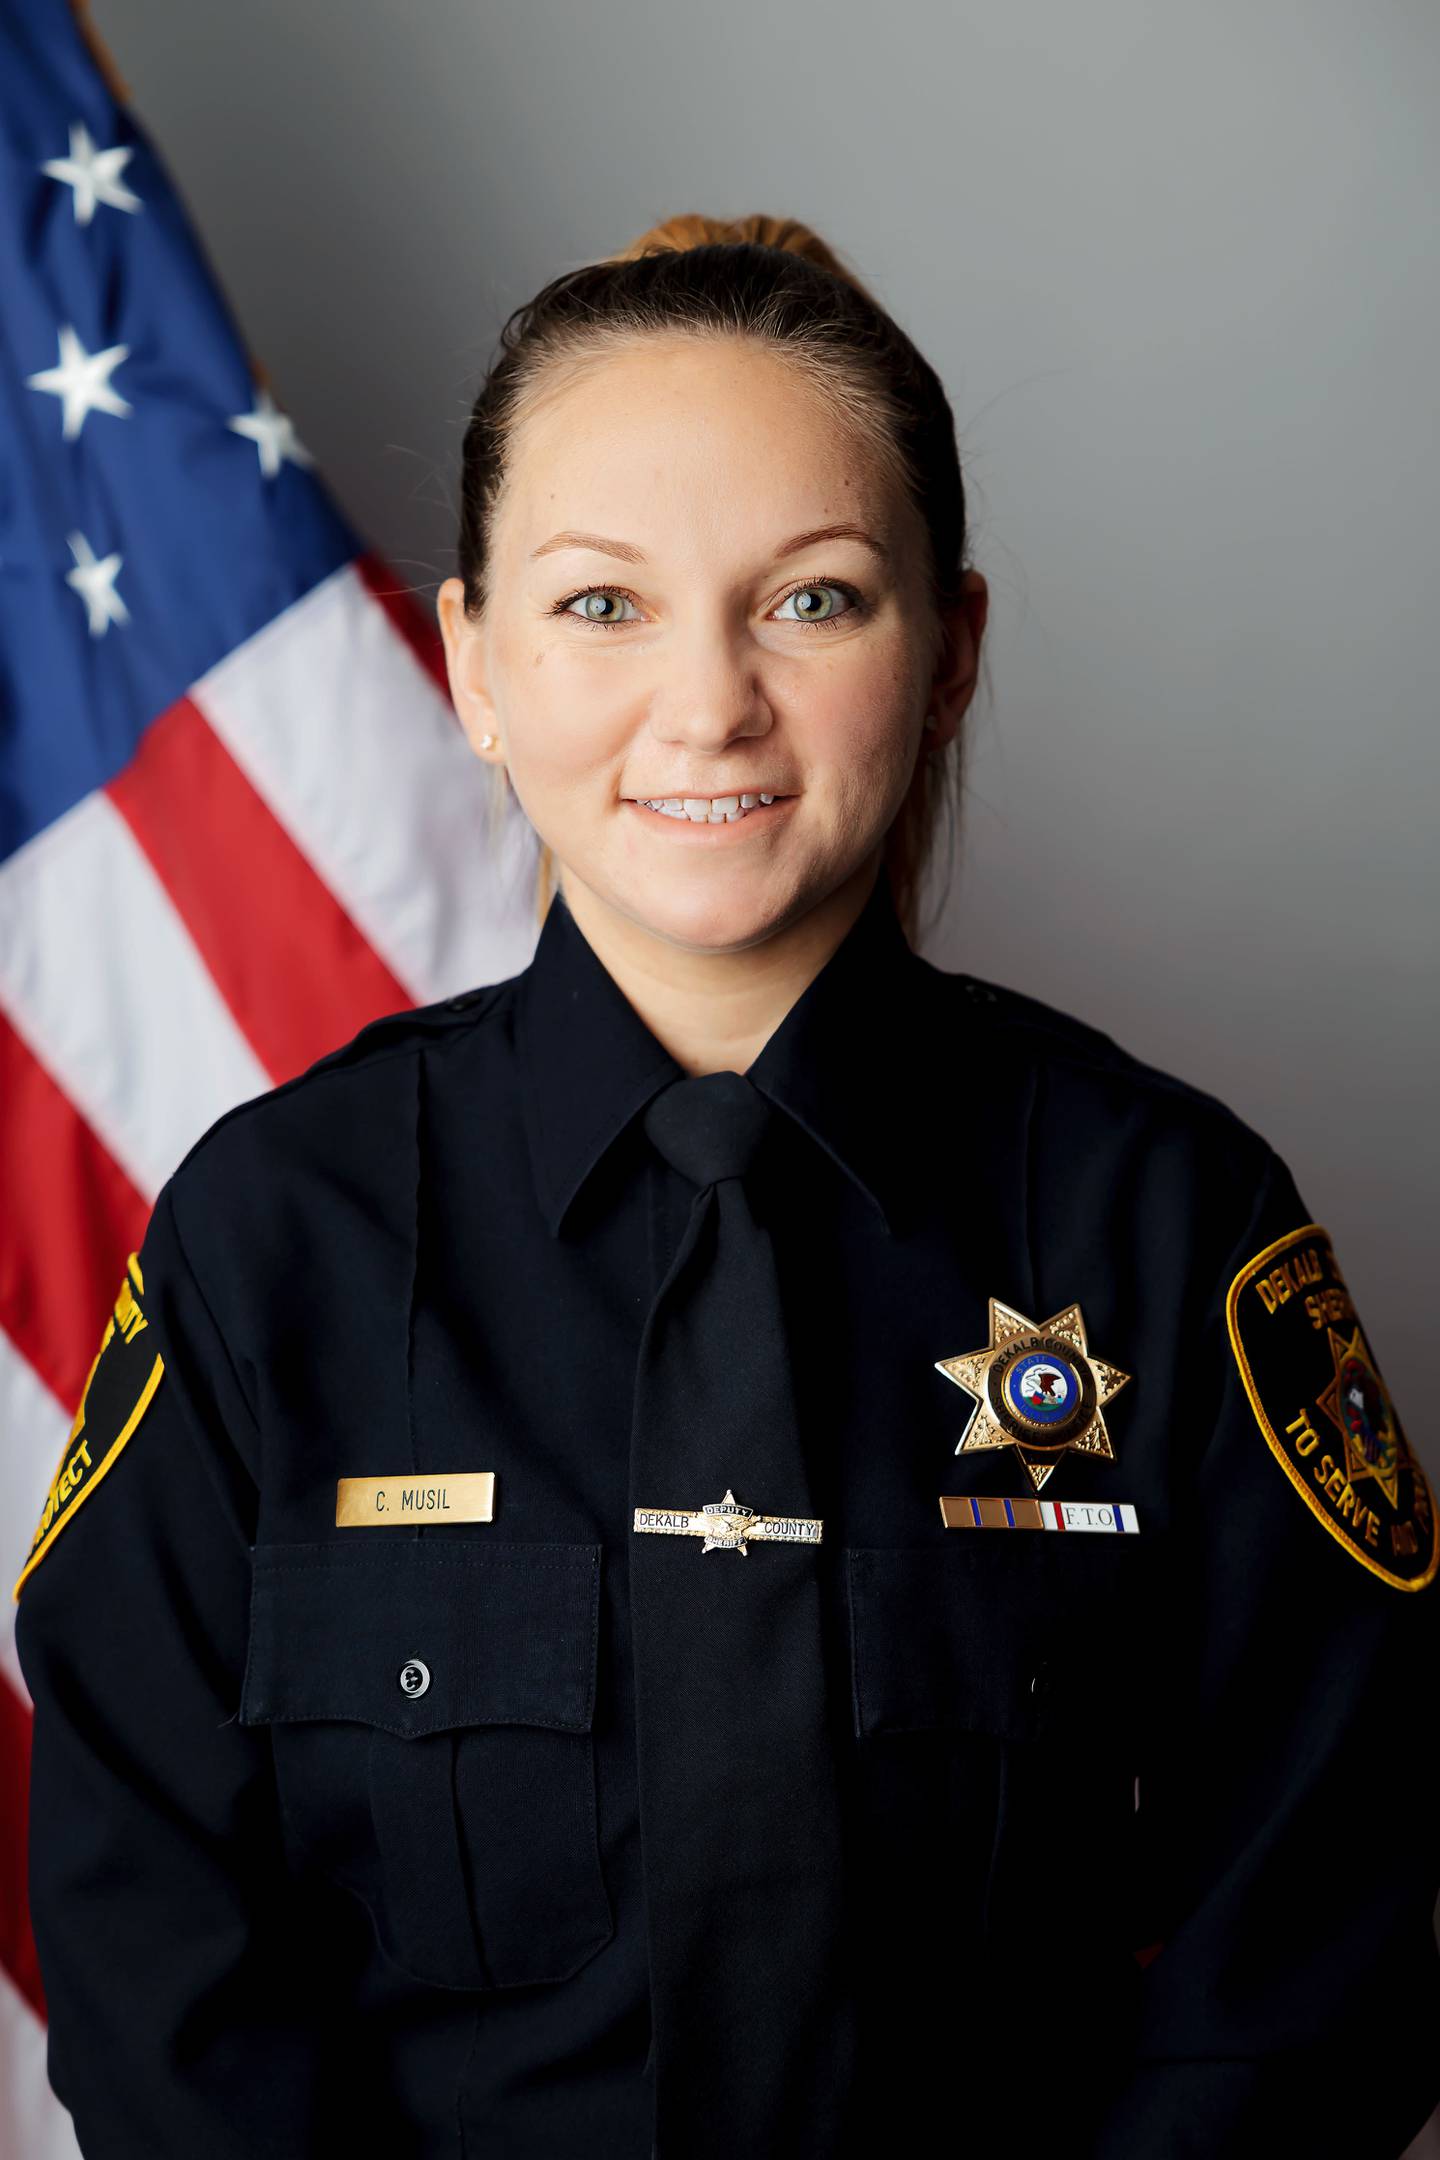 DeKalb County Sheriff's Deputy Christina Musil, 35, a five-year member of the office, was killed Thursday, March 28, 2024, after her squad car was rear-ended by a truck, according to the Illinois State Police. Musil also was a military veteran who served in Afghanistan, the sheriff's office said.